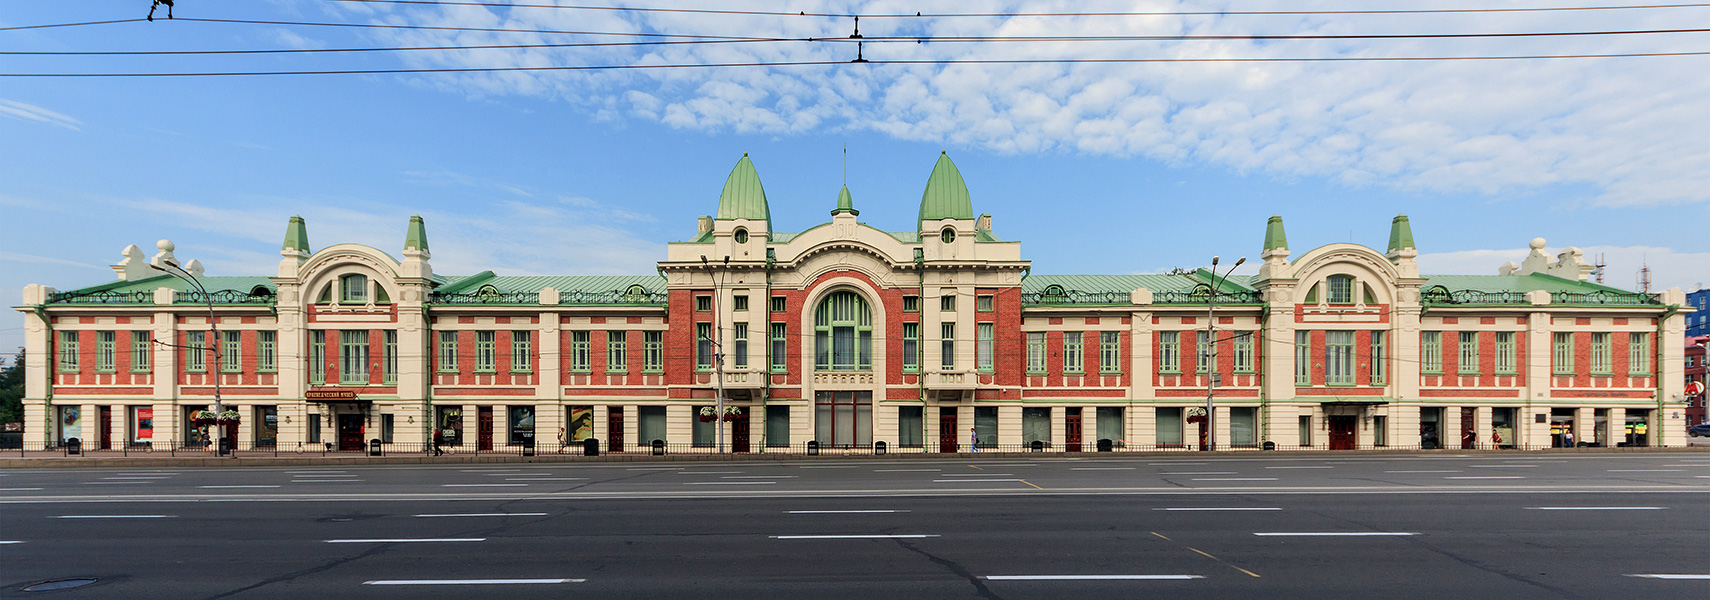 Former Trade House in Novosibirsk, today Novosibirsk State Museum of Local History